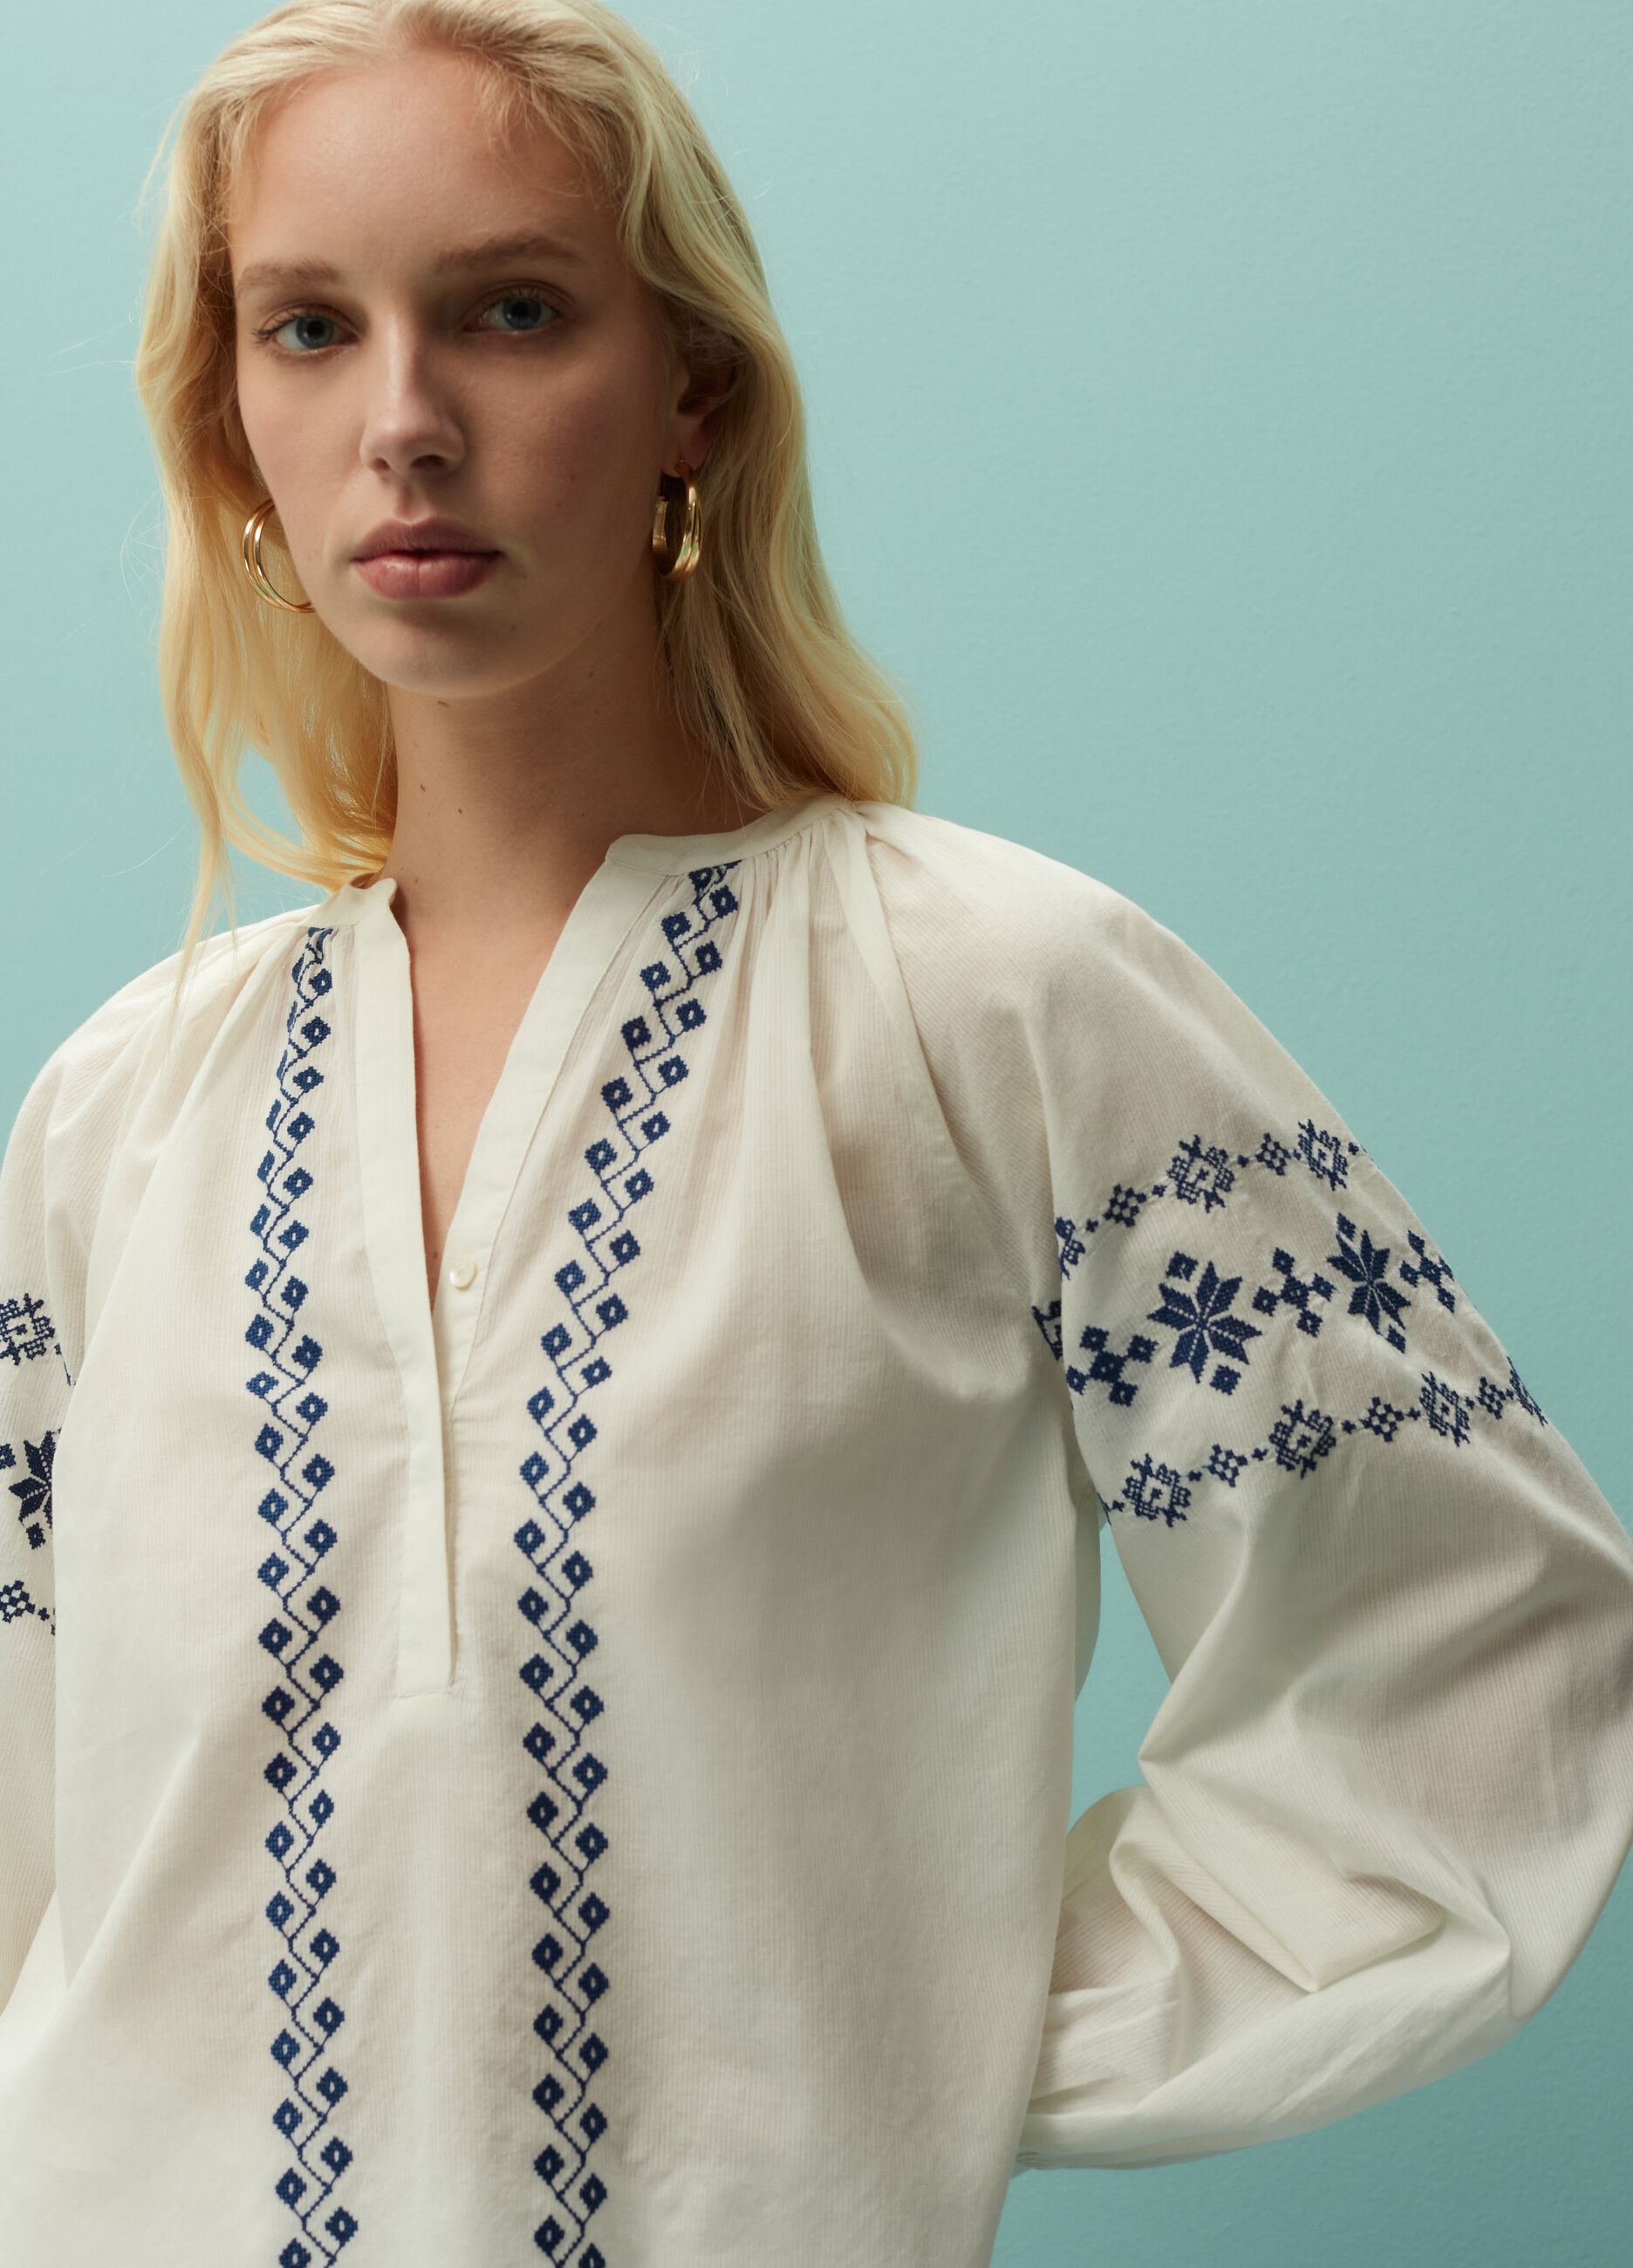 Blouse with ethnic embroidery